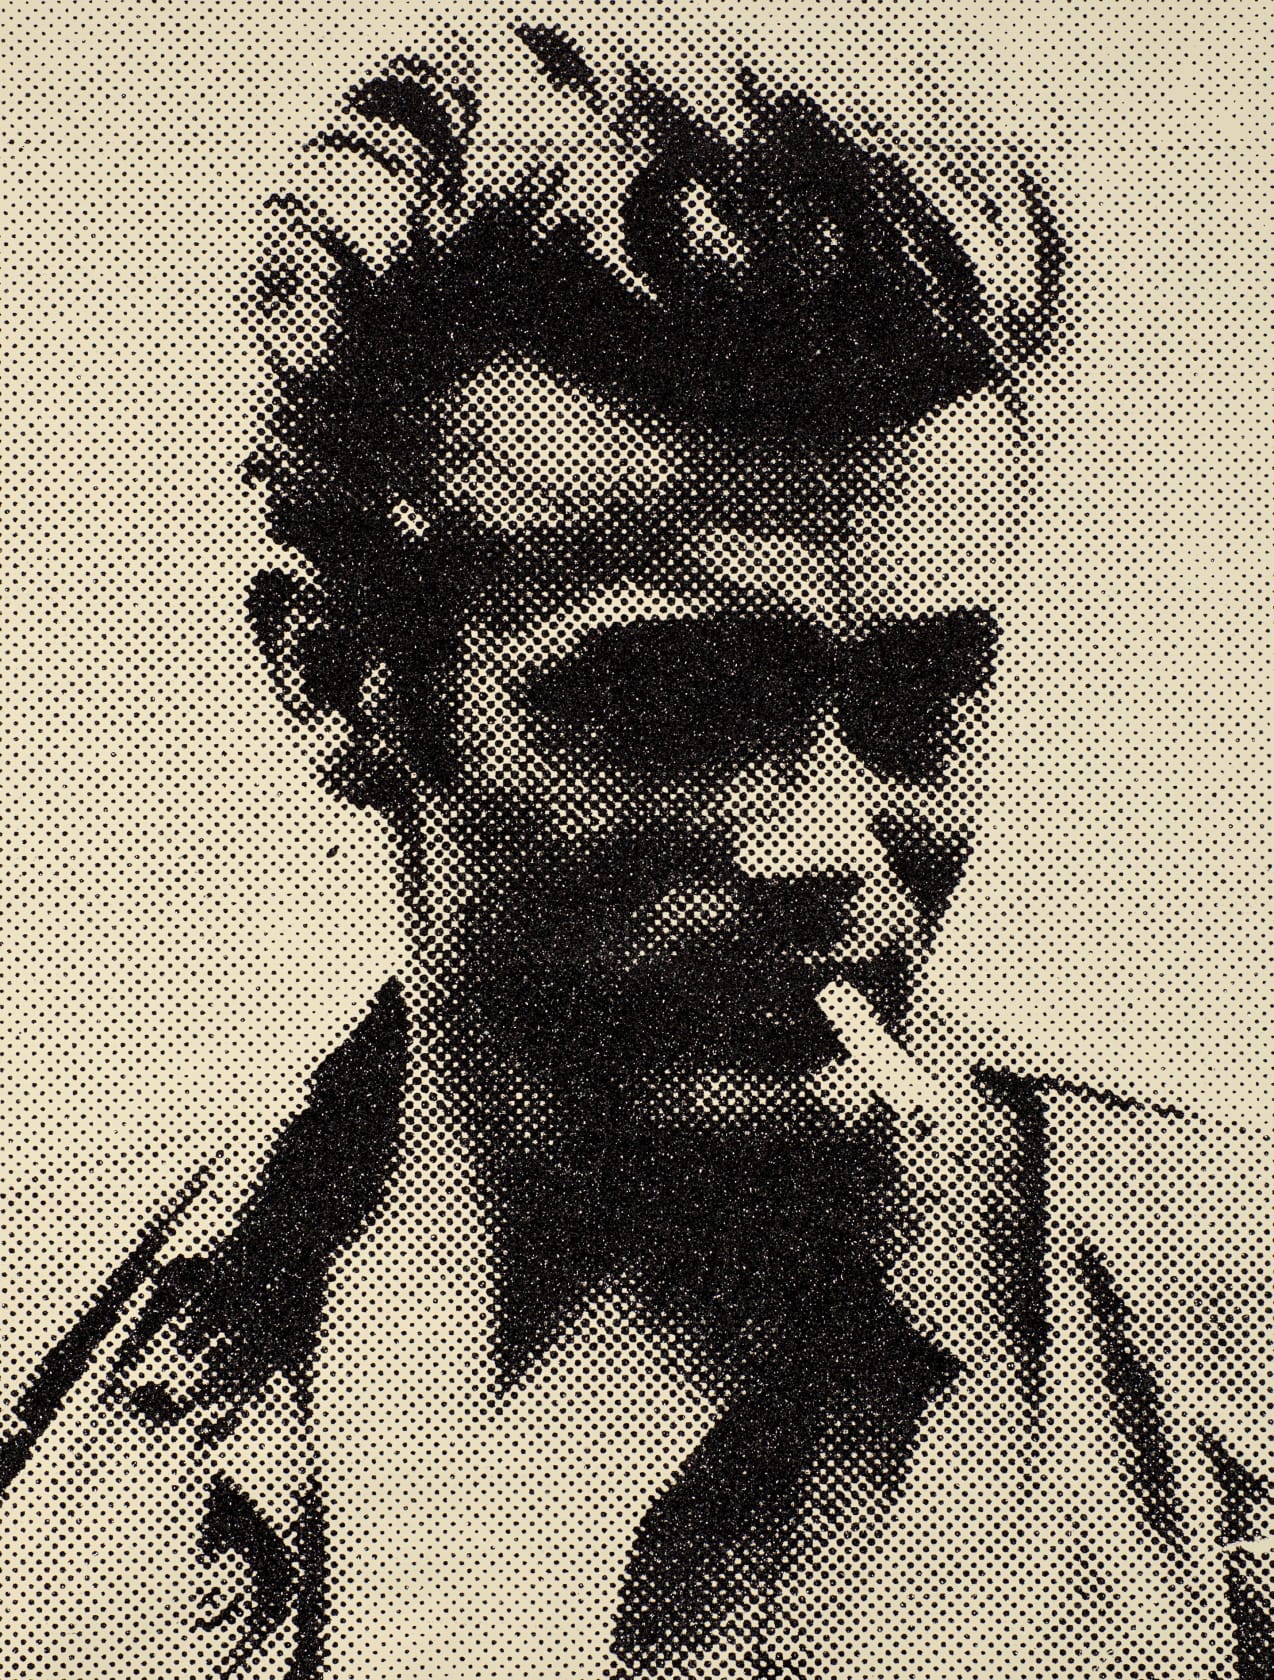 Russell Young, James Dean - B&W, 2021